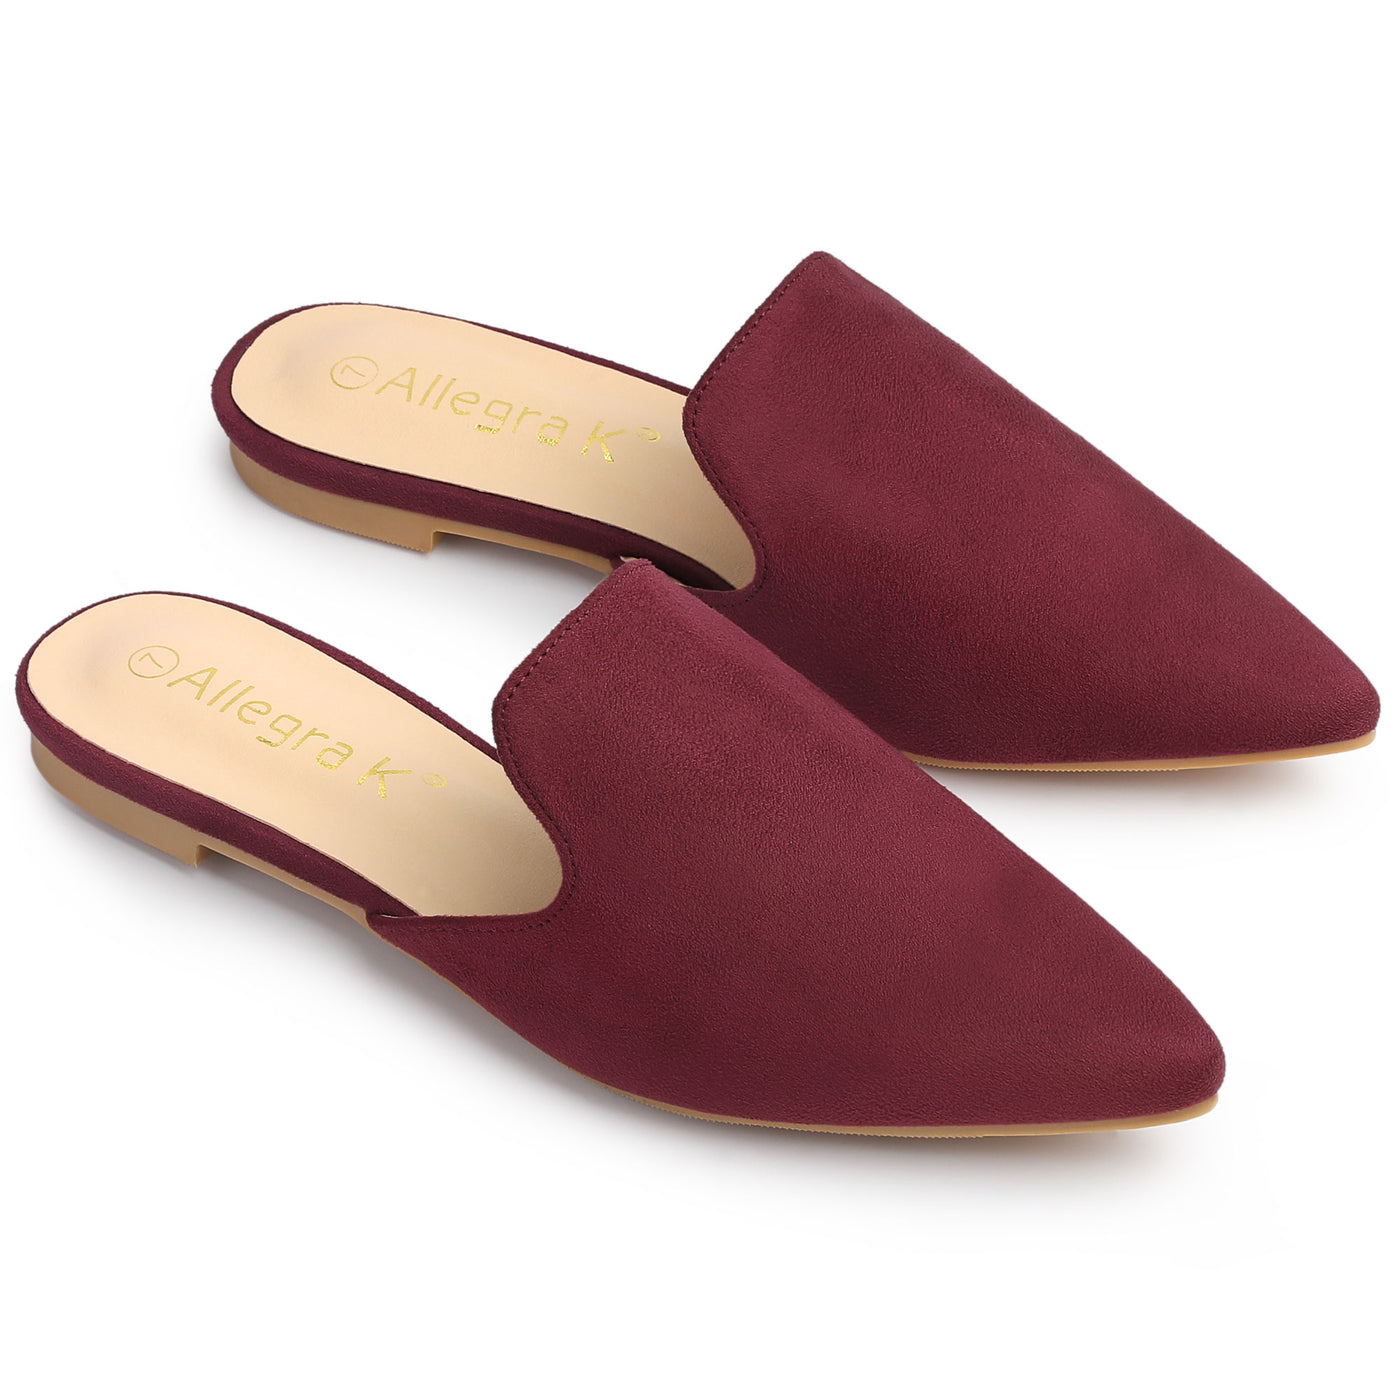 Allegra K Faux Suede Pointed Toe Flat Slip On Slides Mules